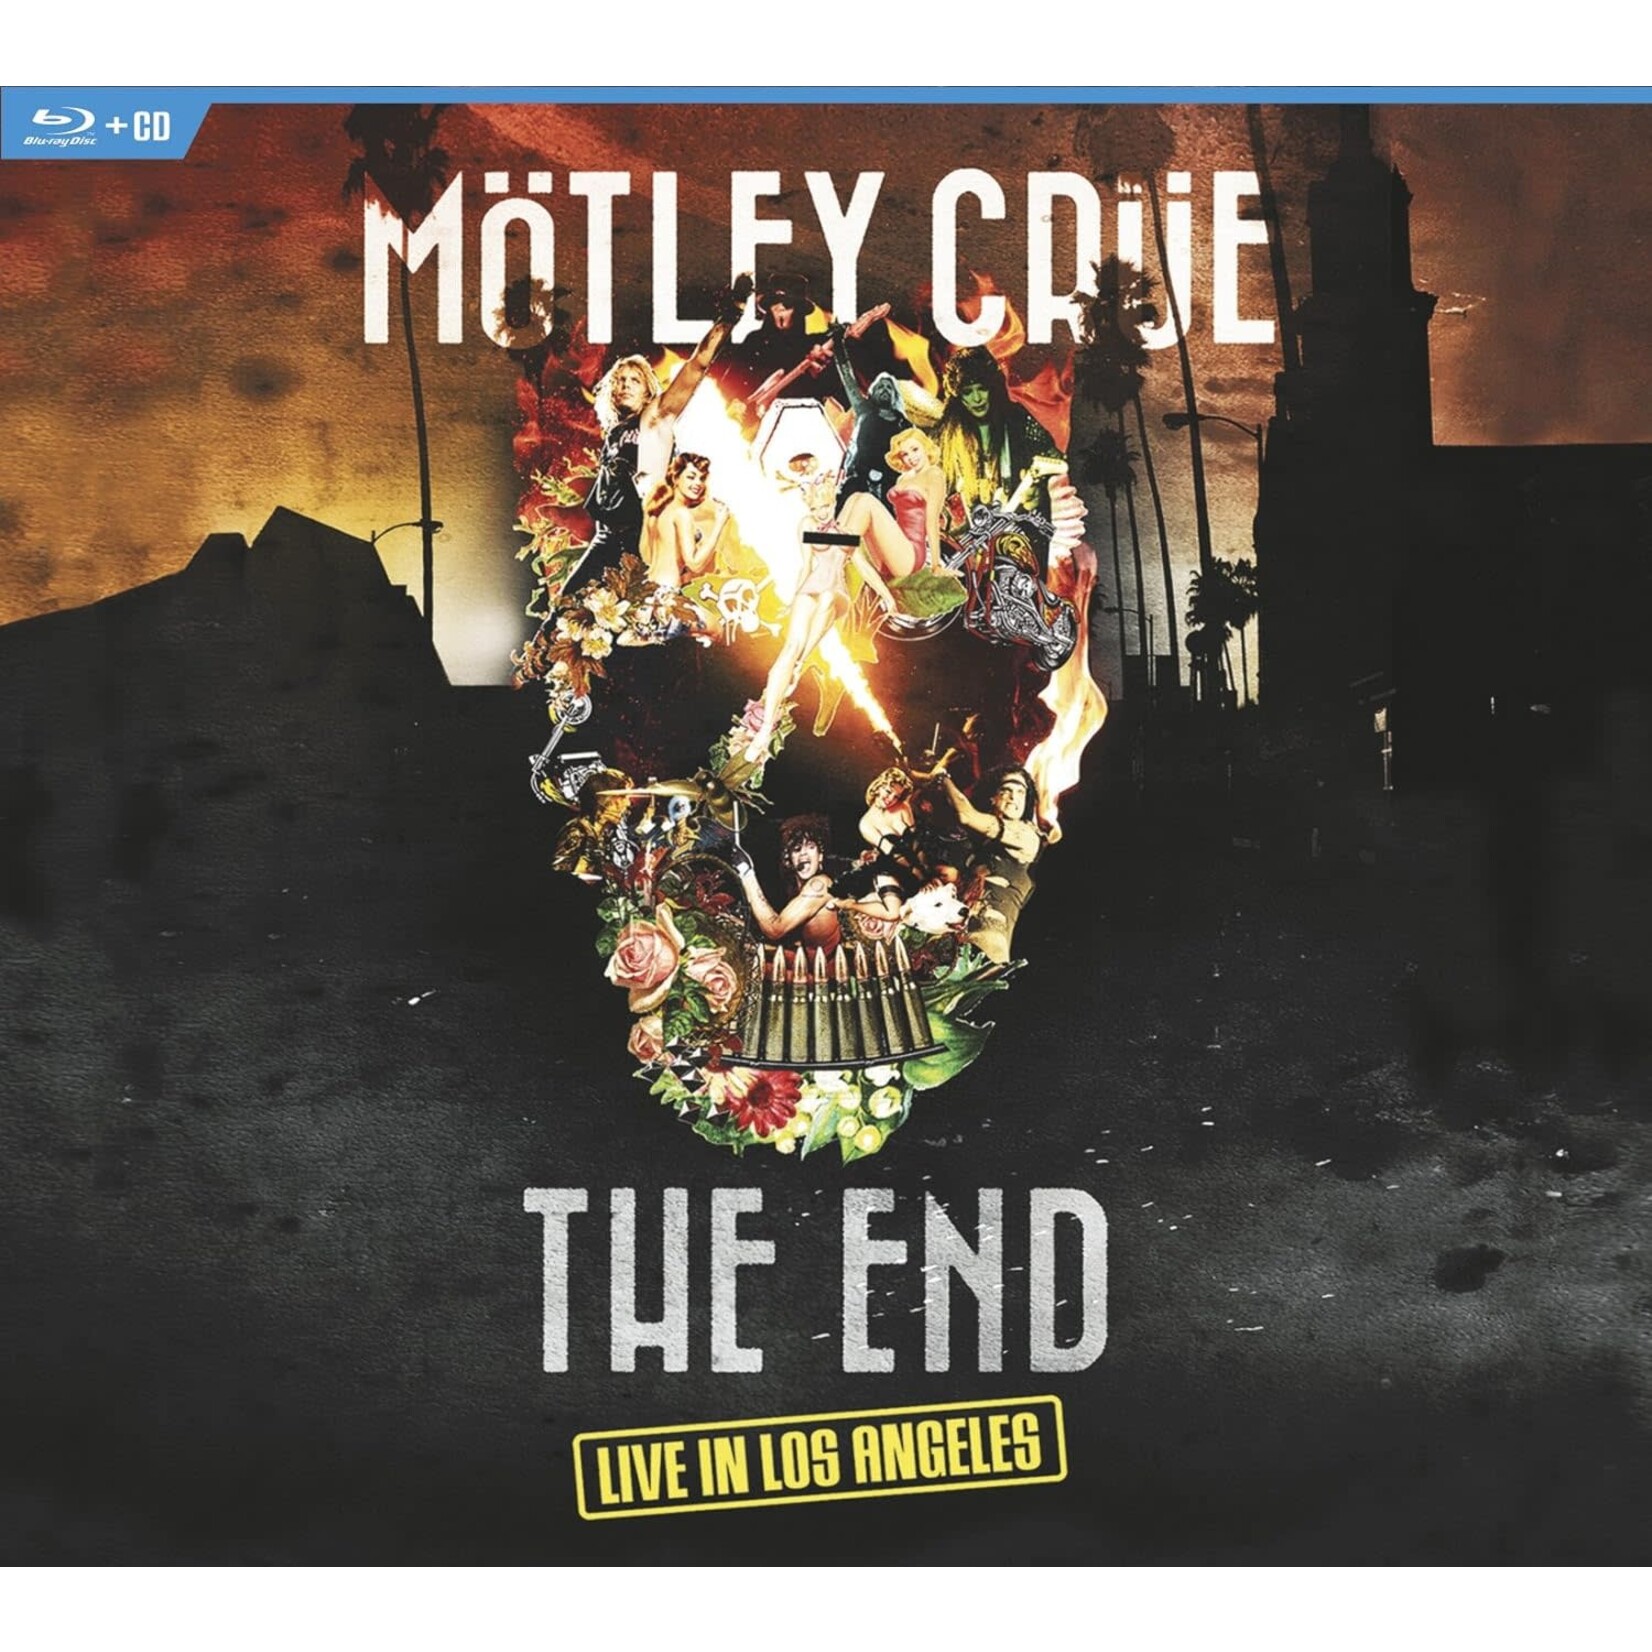 Motley Crue - The End: Live In Los Angeles [BRD/CD]